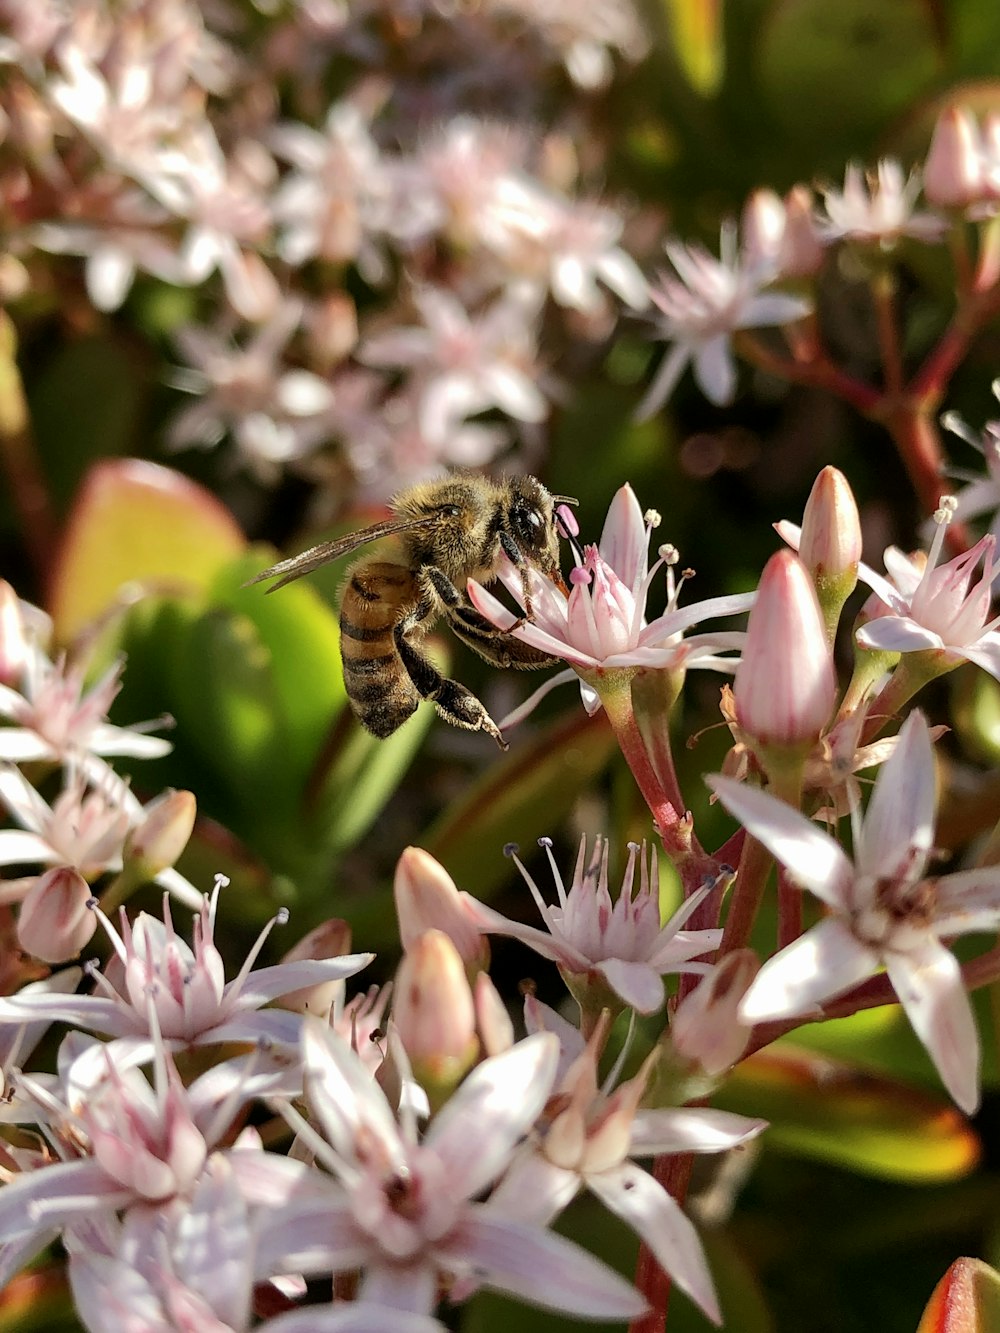 honeybee perched on pink and white flower in close up photography during daytime